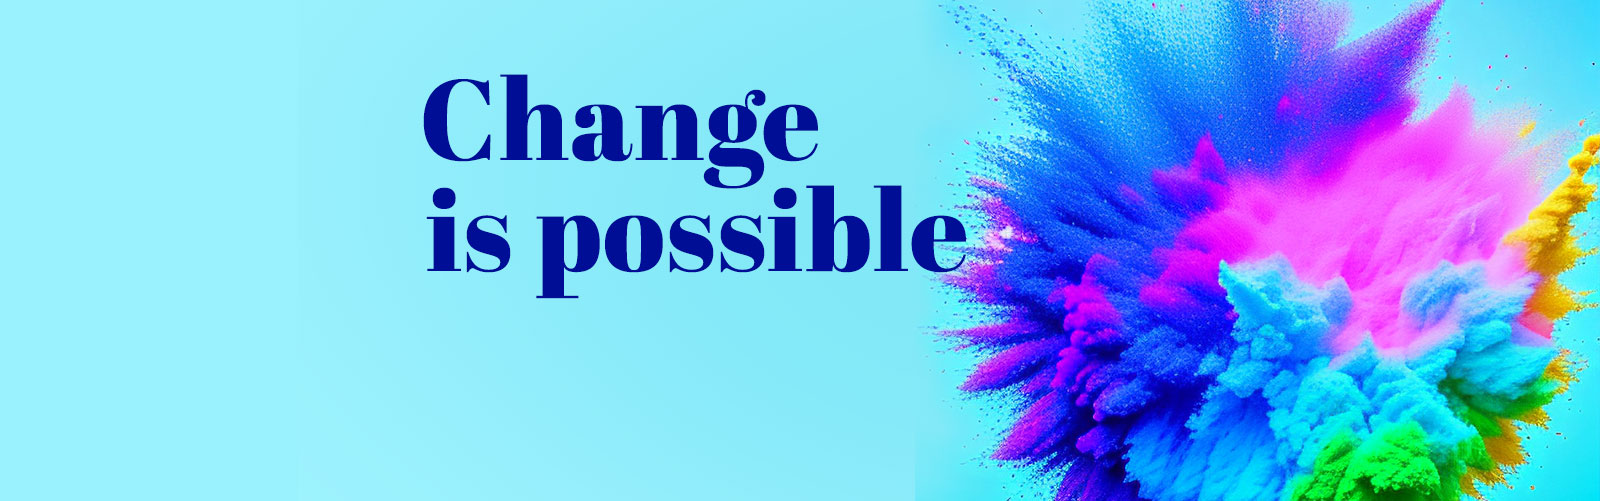 change is possible